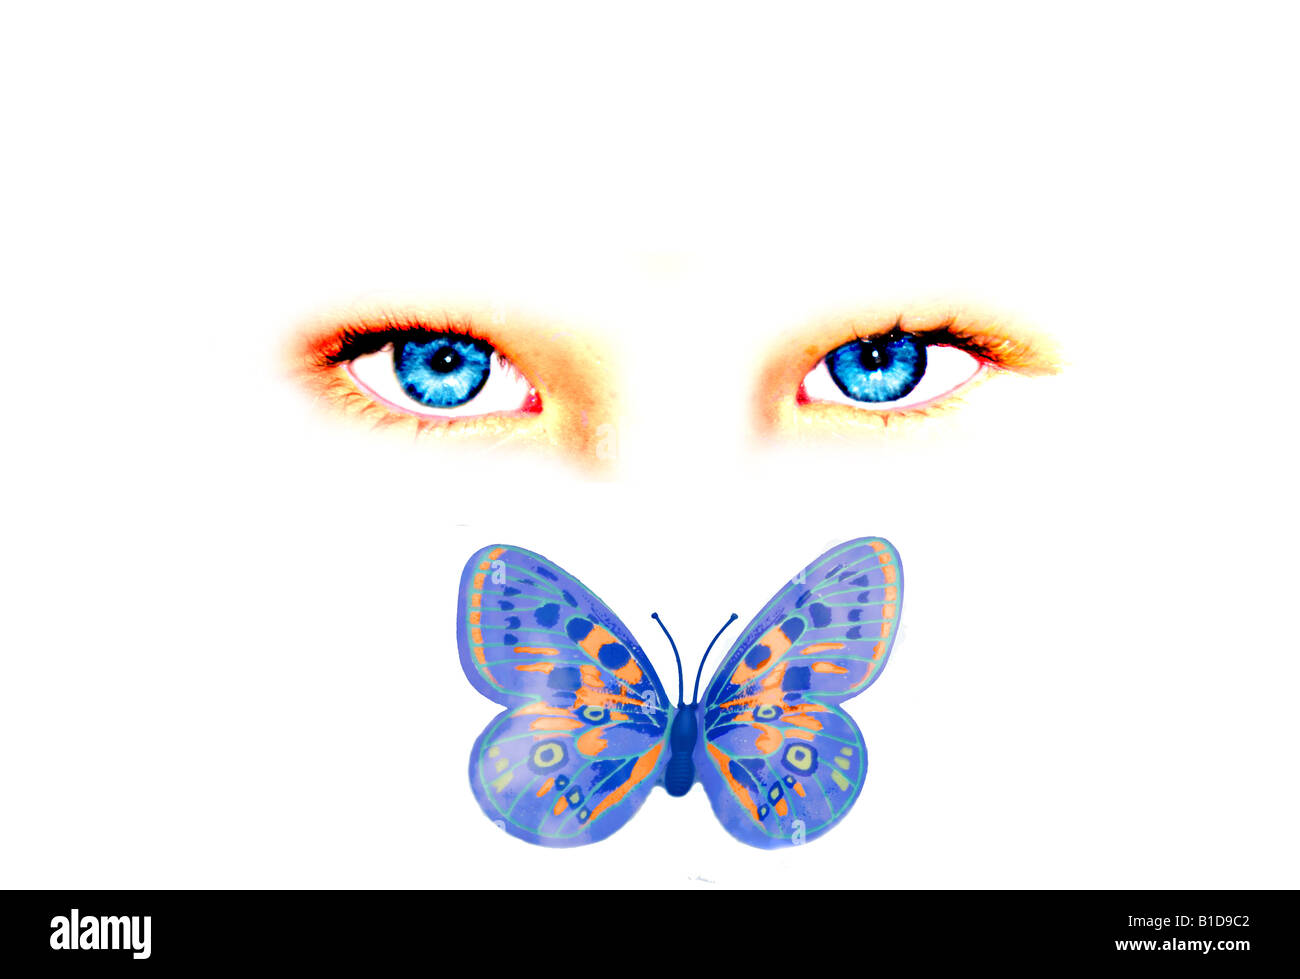 Blue eyes and butterfly, fantasy concept Stock Photo